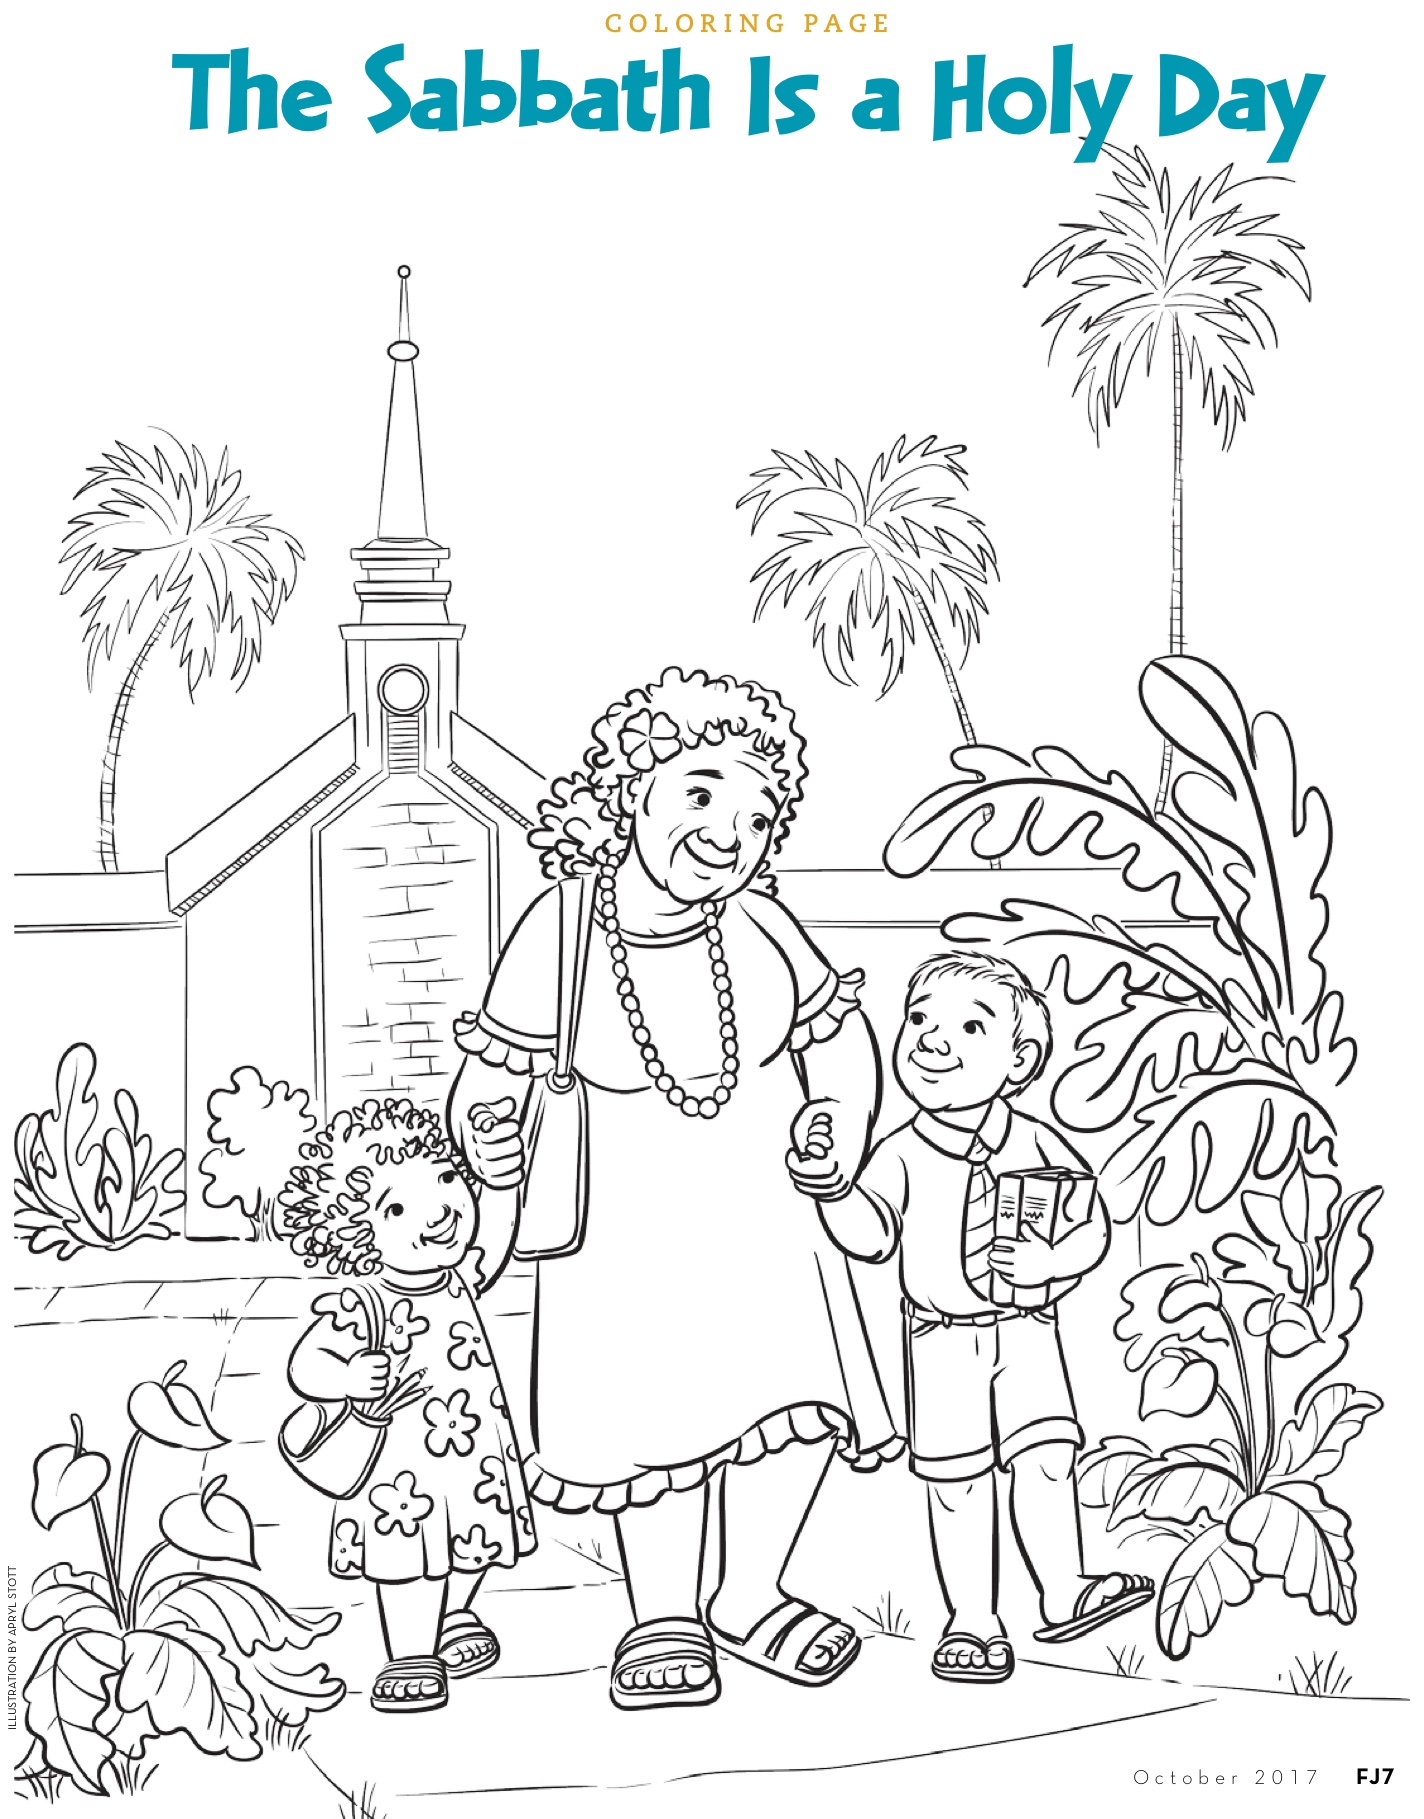 Friend October 2017 The Sabbath is a holy day coloring page